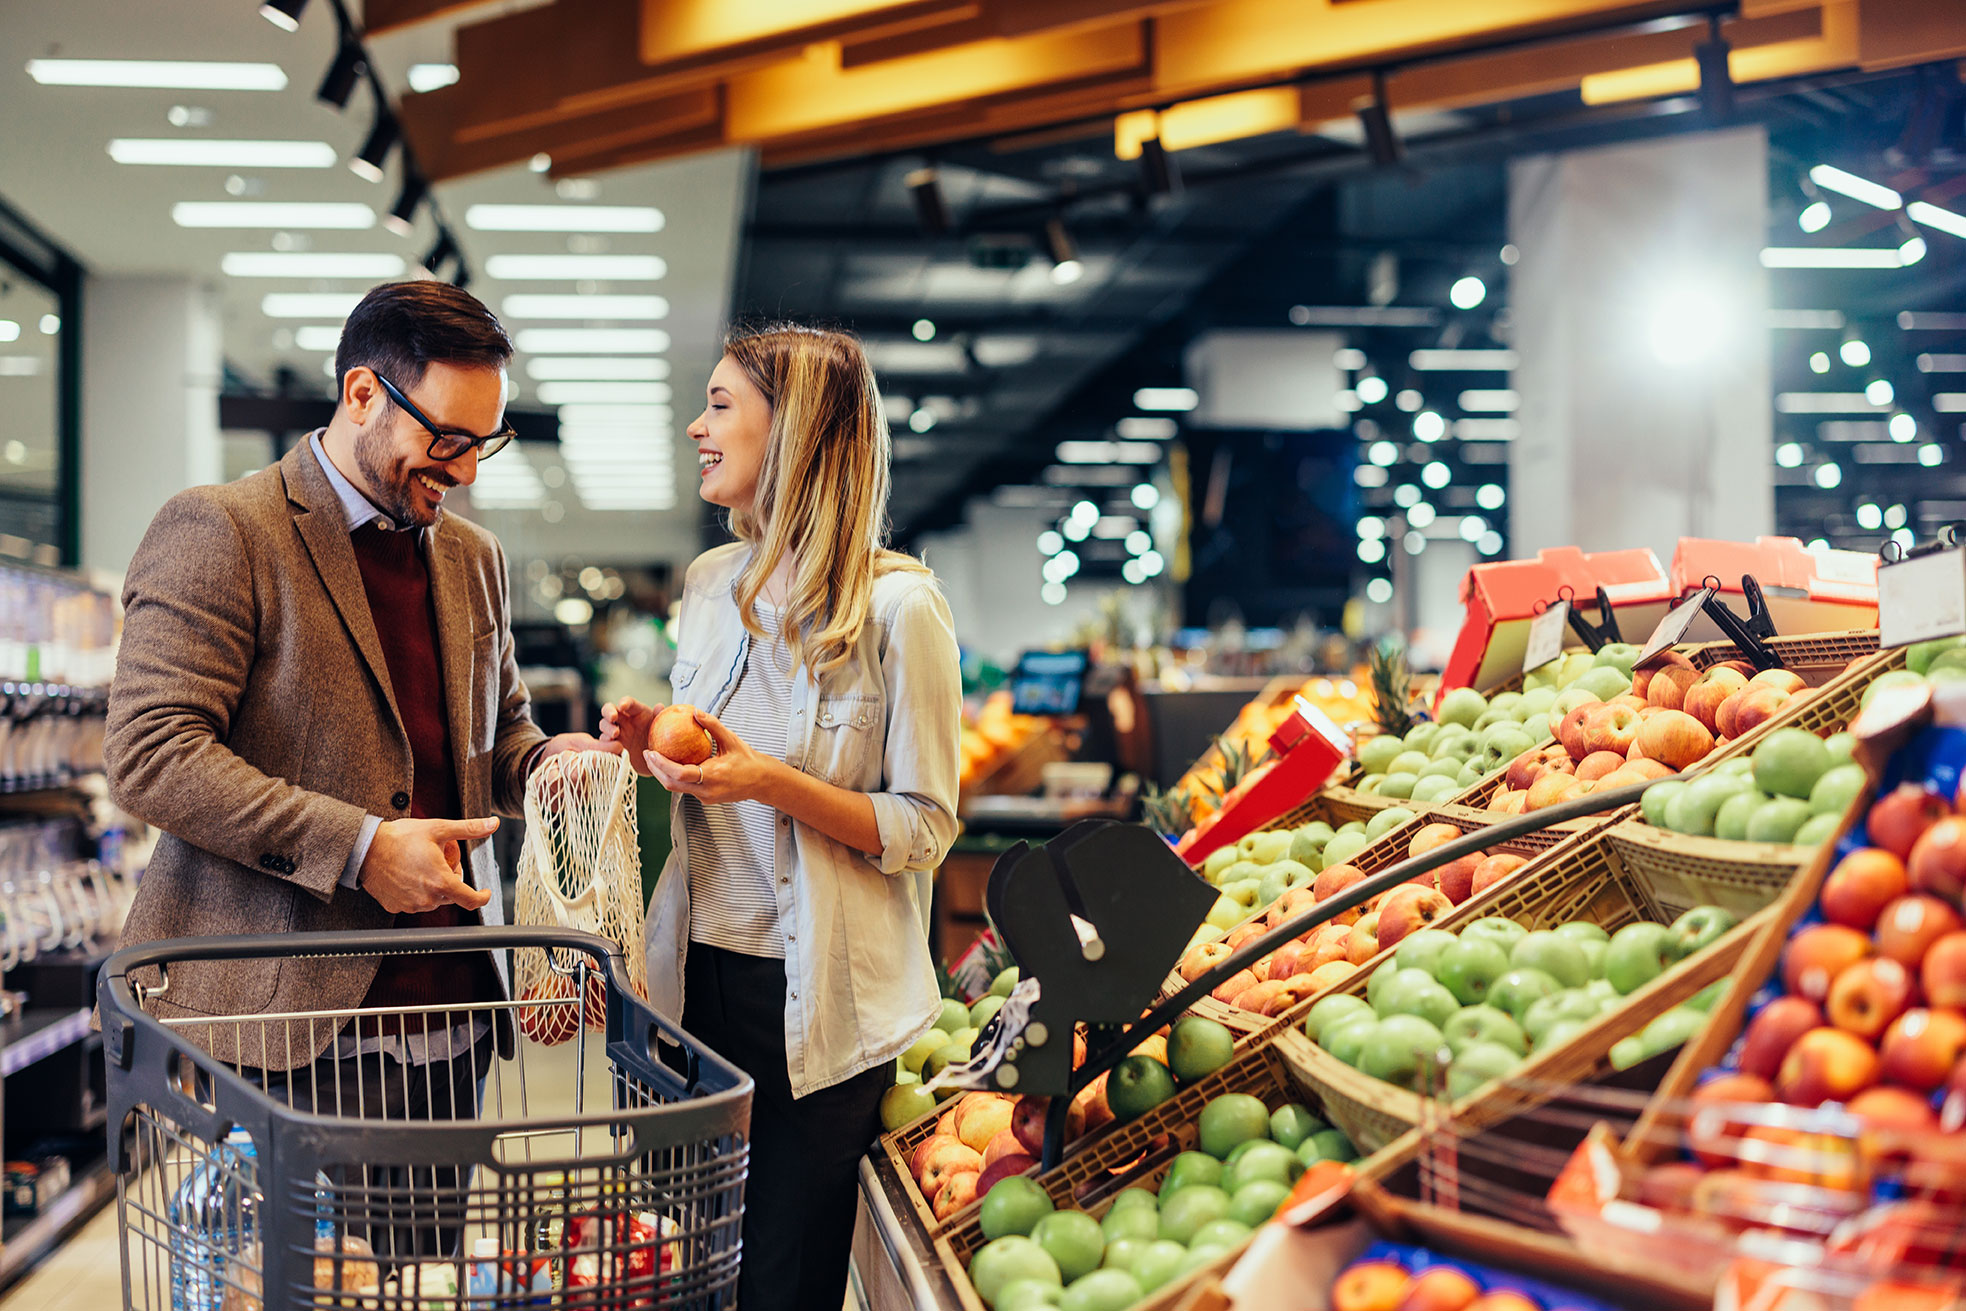 How to build a retail empire on wealthy grocery shoppers